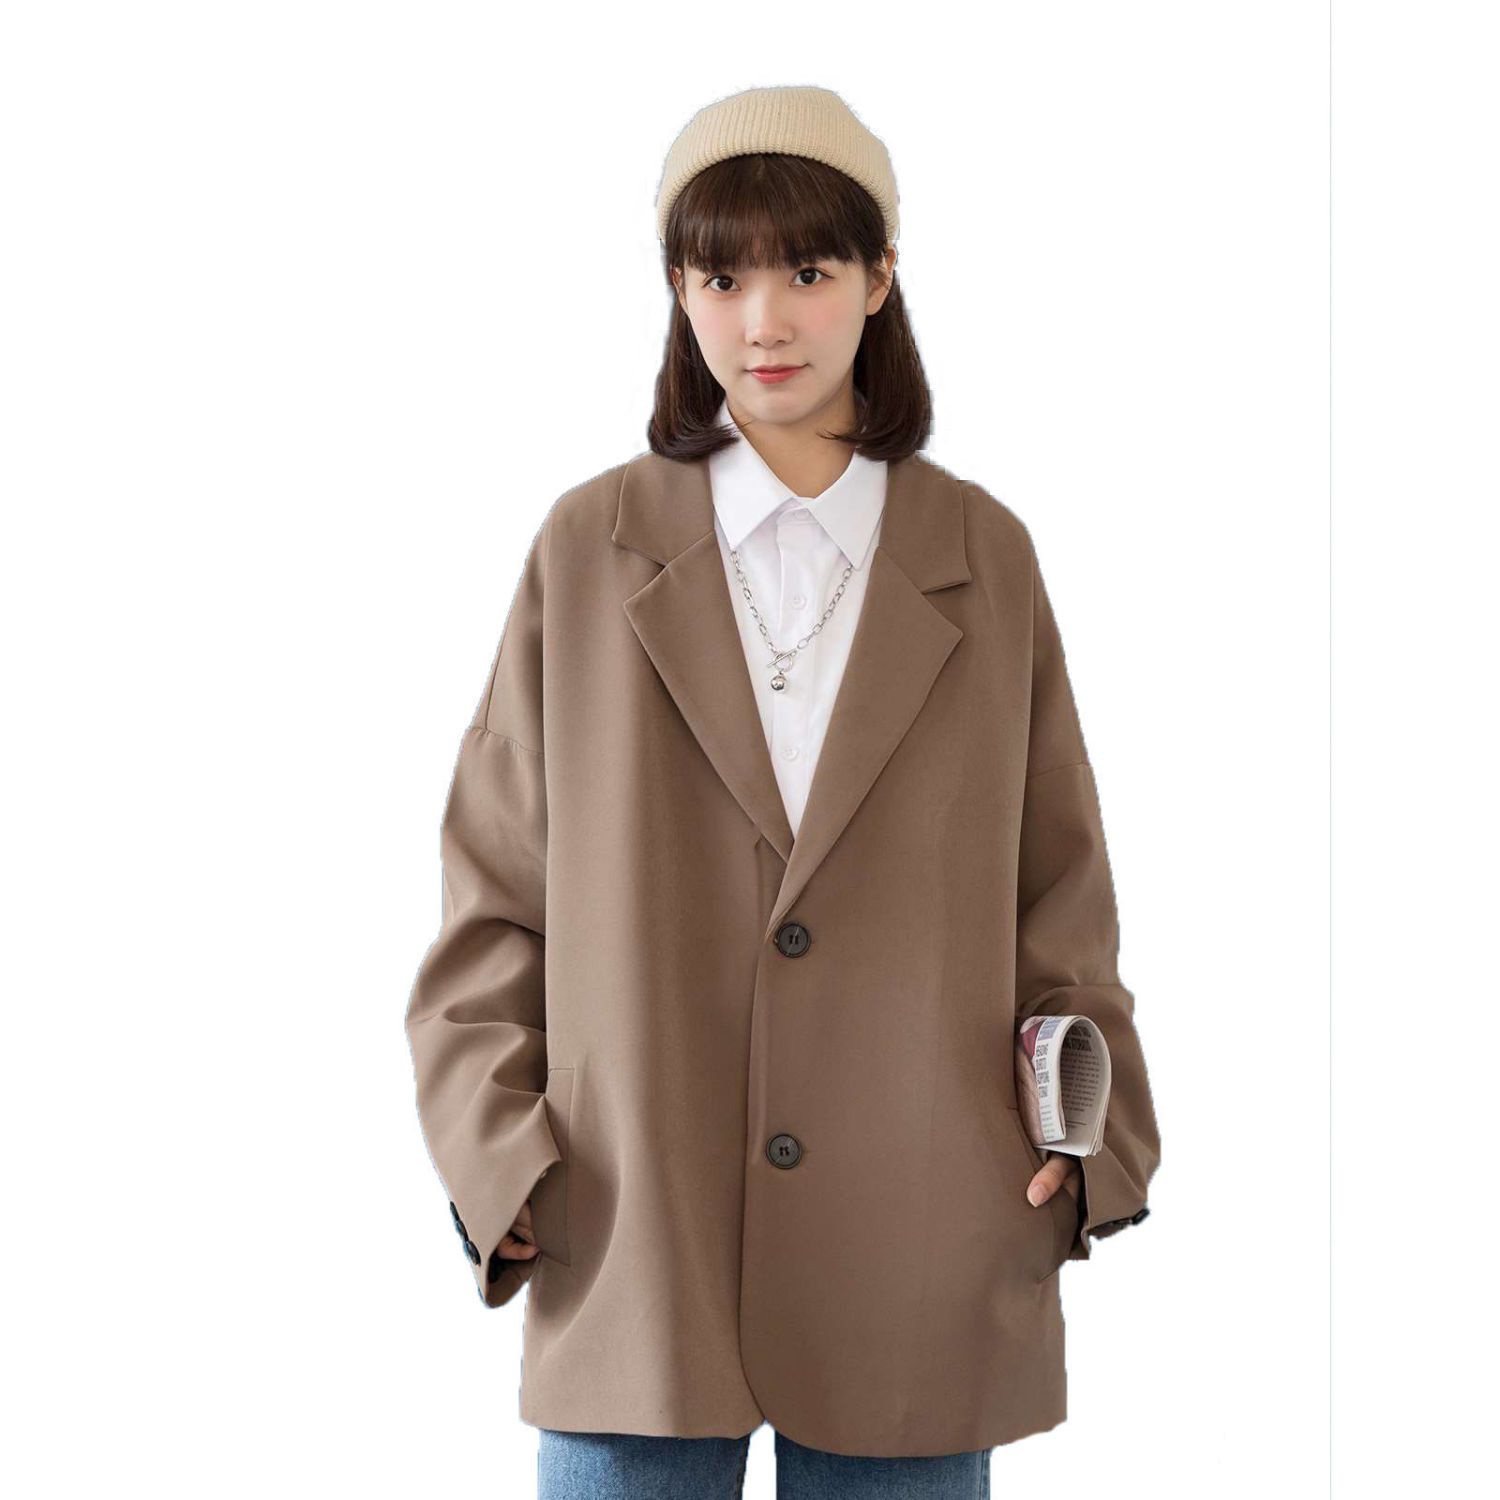 Oversize suit coat for men and women, casual style, spring and autumn new style, off shoulder couple loose style, temperament, college style